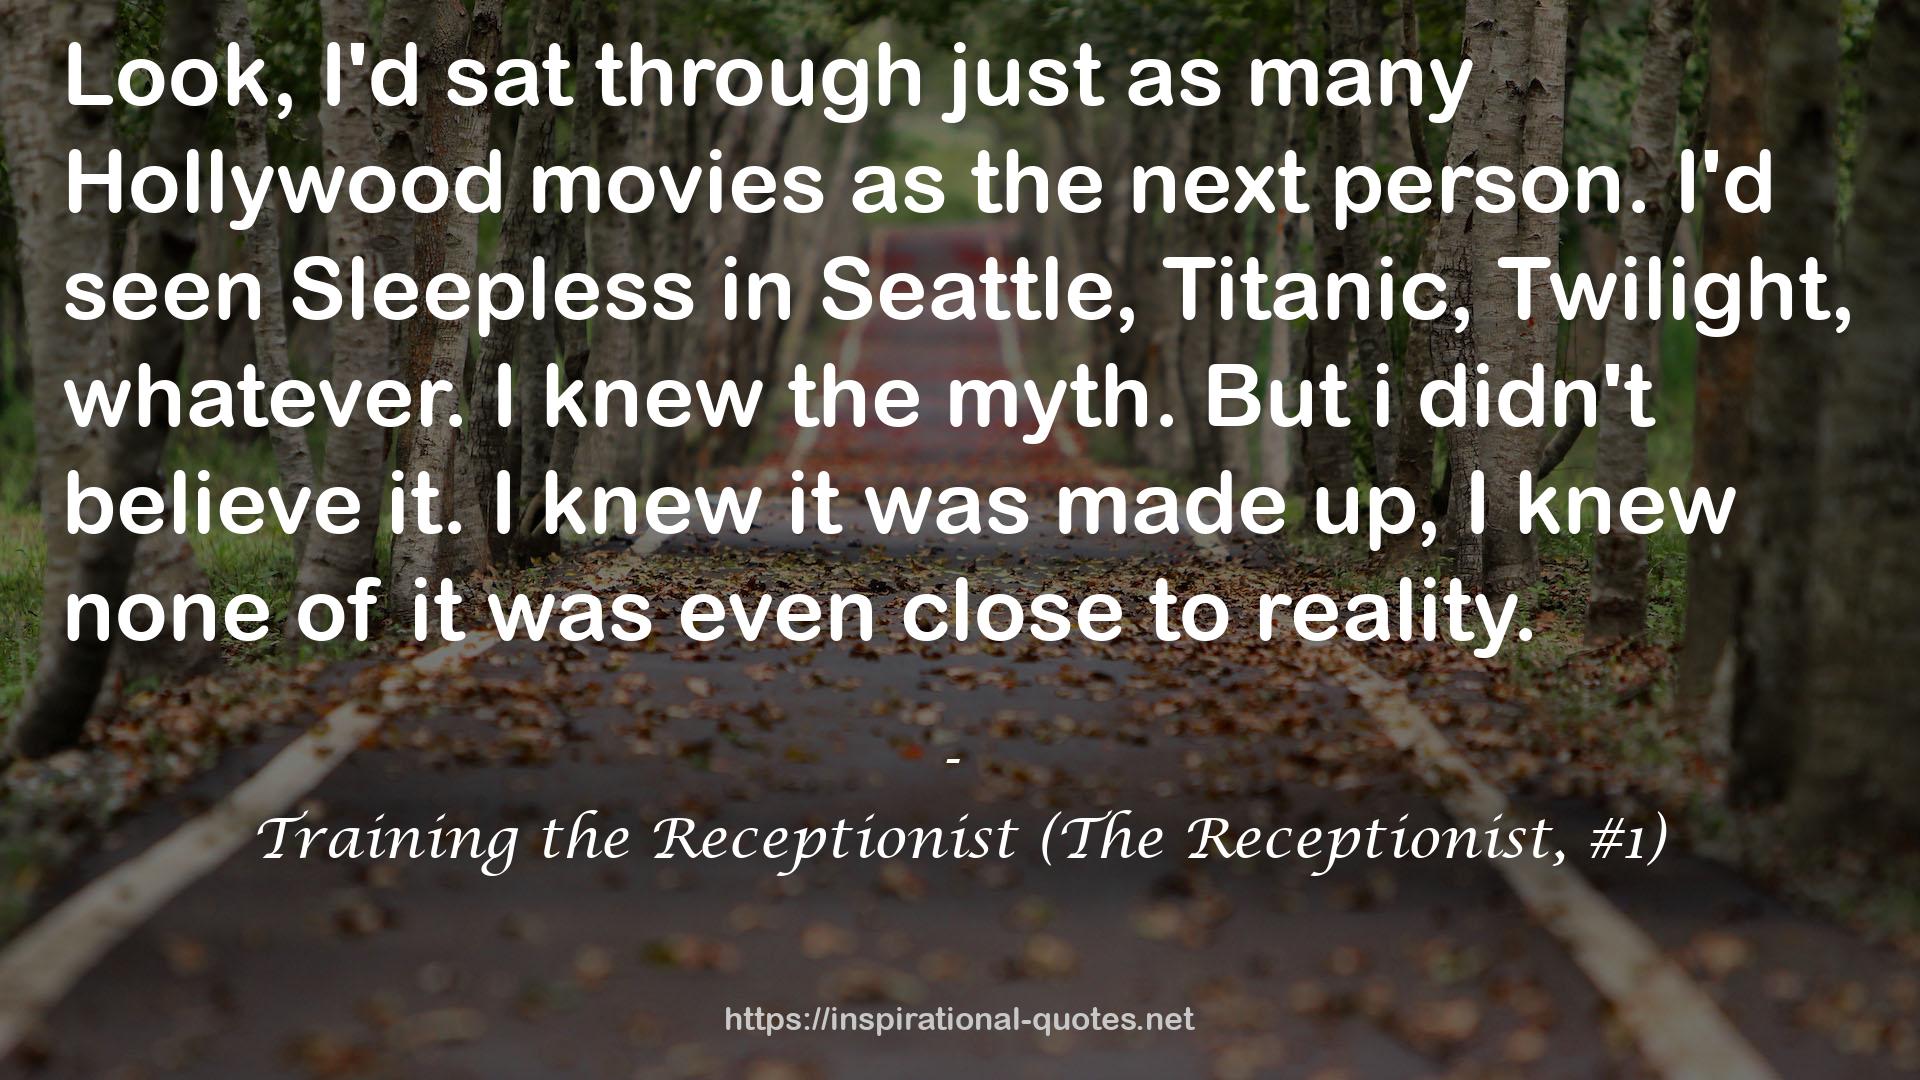 Training the Receptionist (The Receptionist, #1) QUOTES